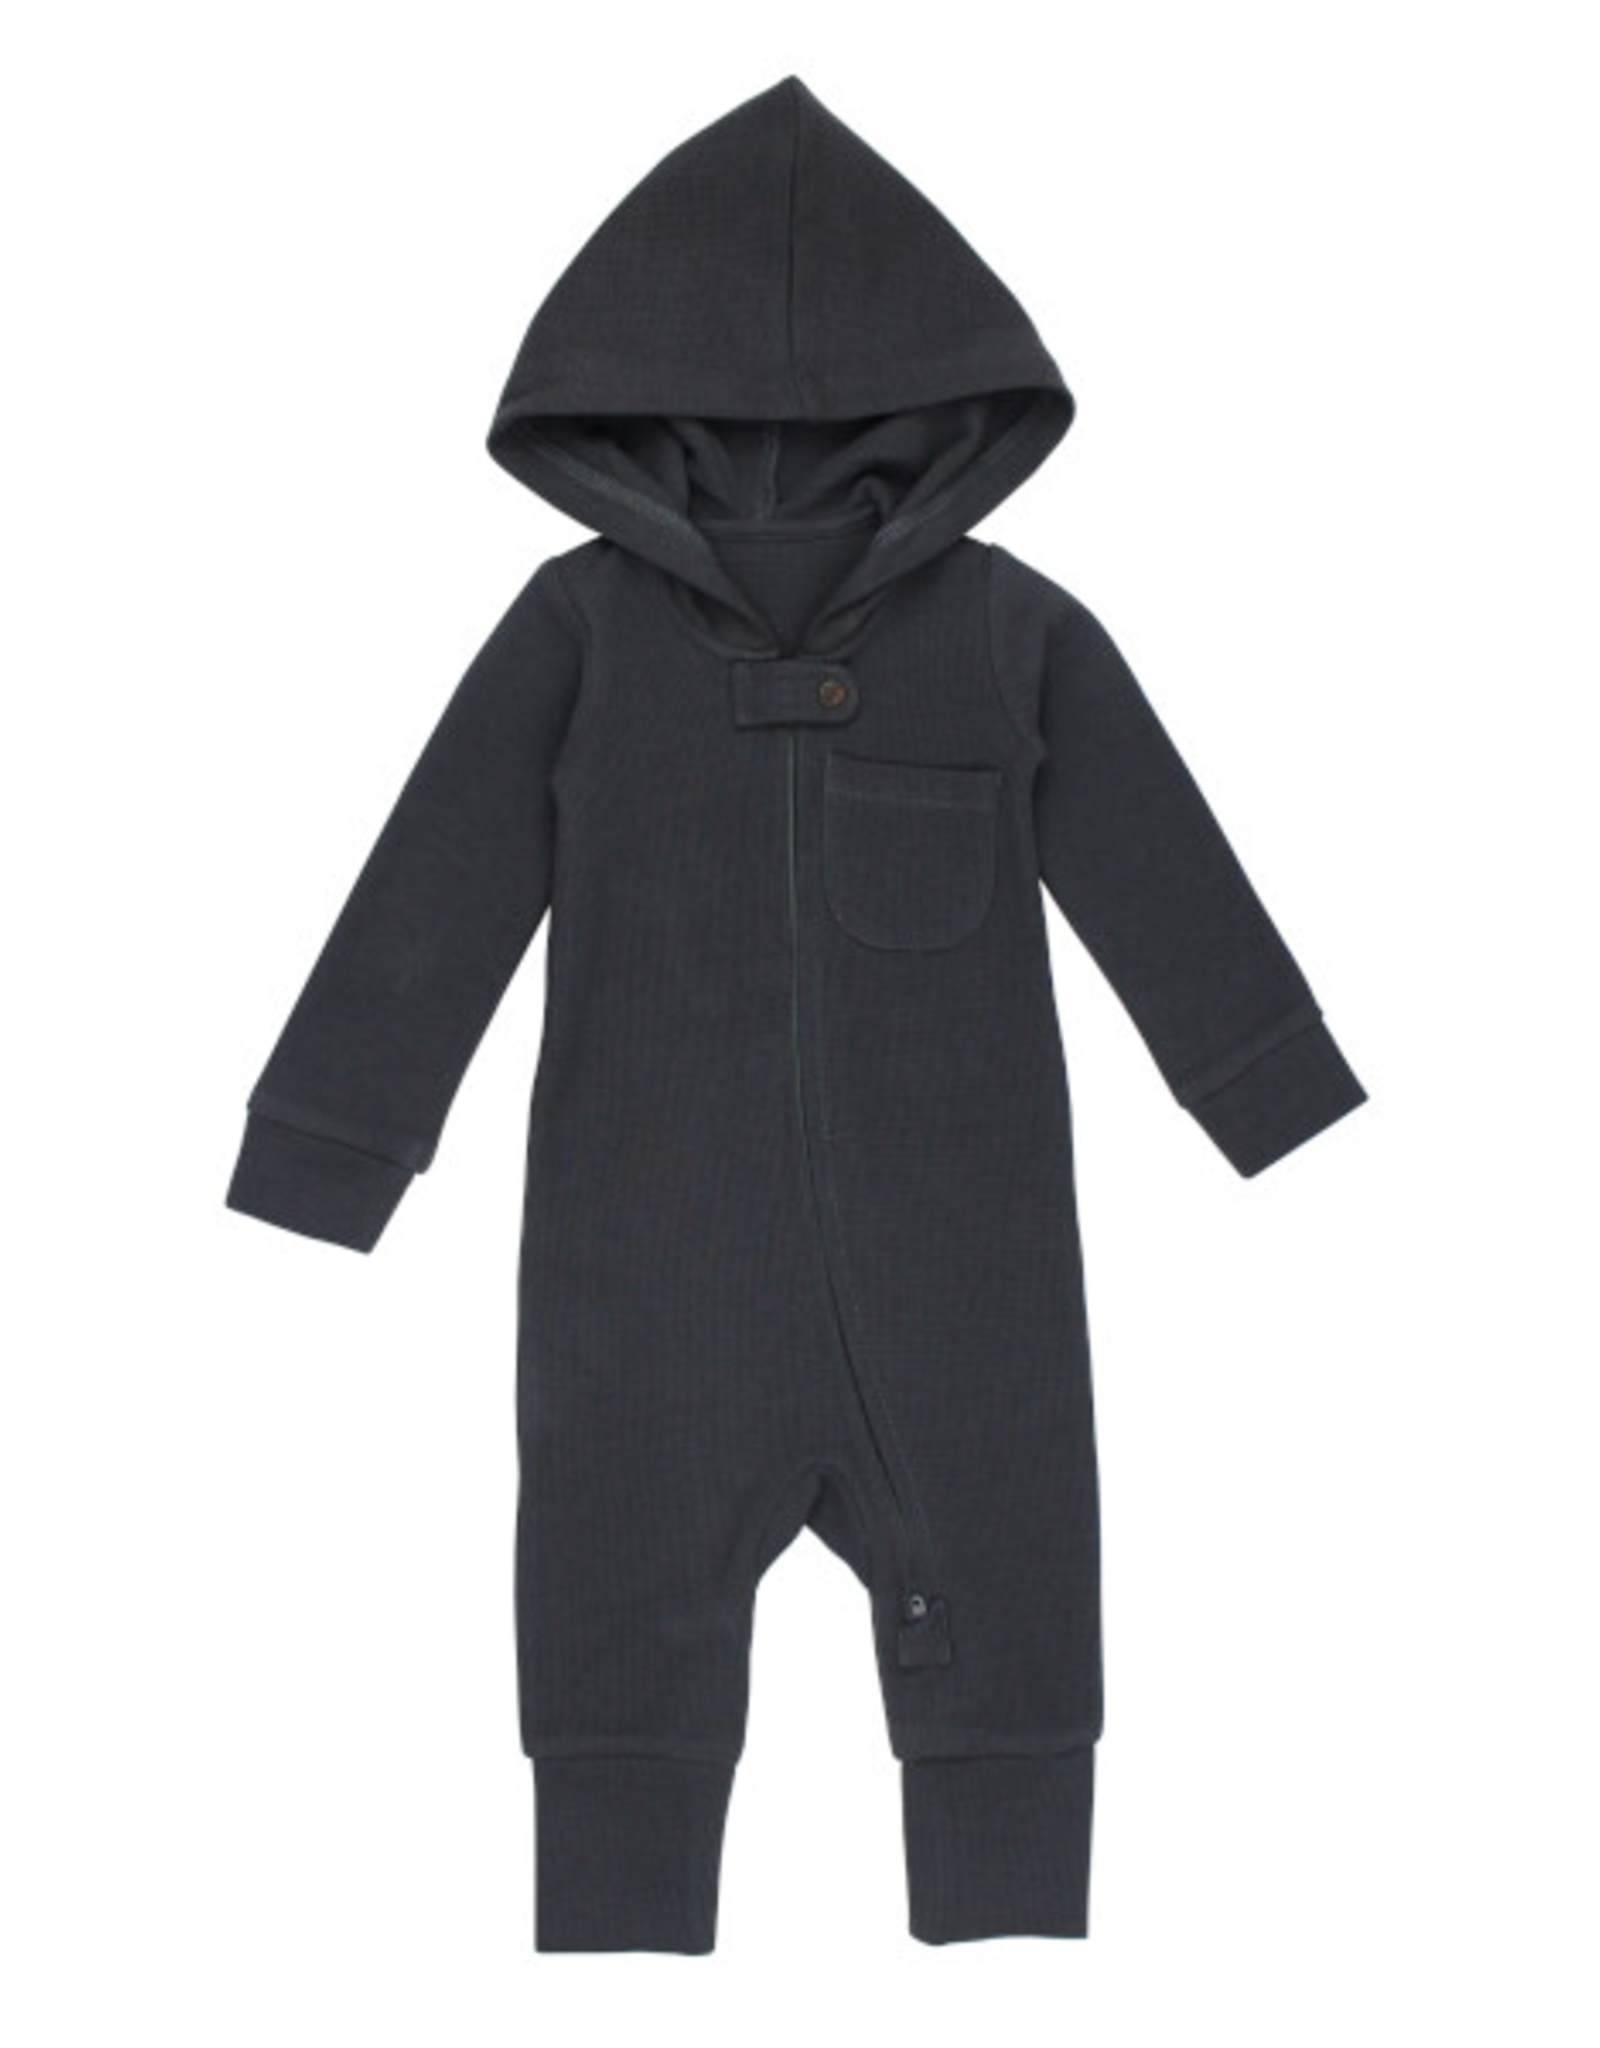 L'oved Baby Thermal Hooded Zipper Romper Coal